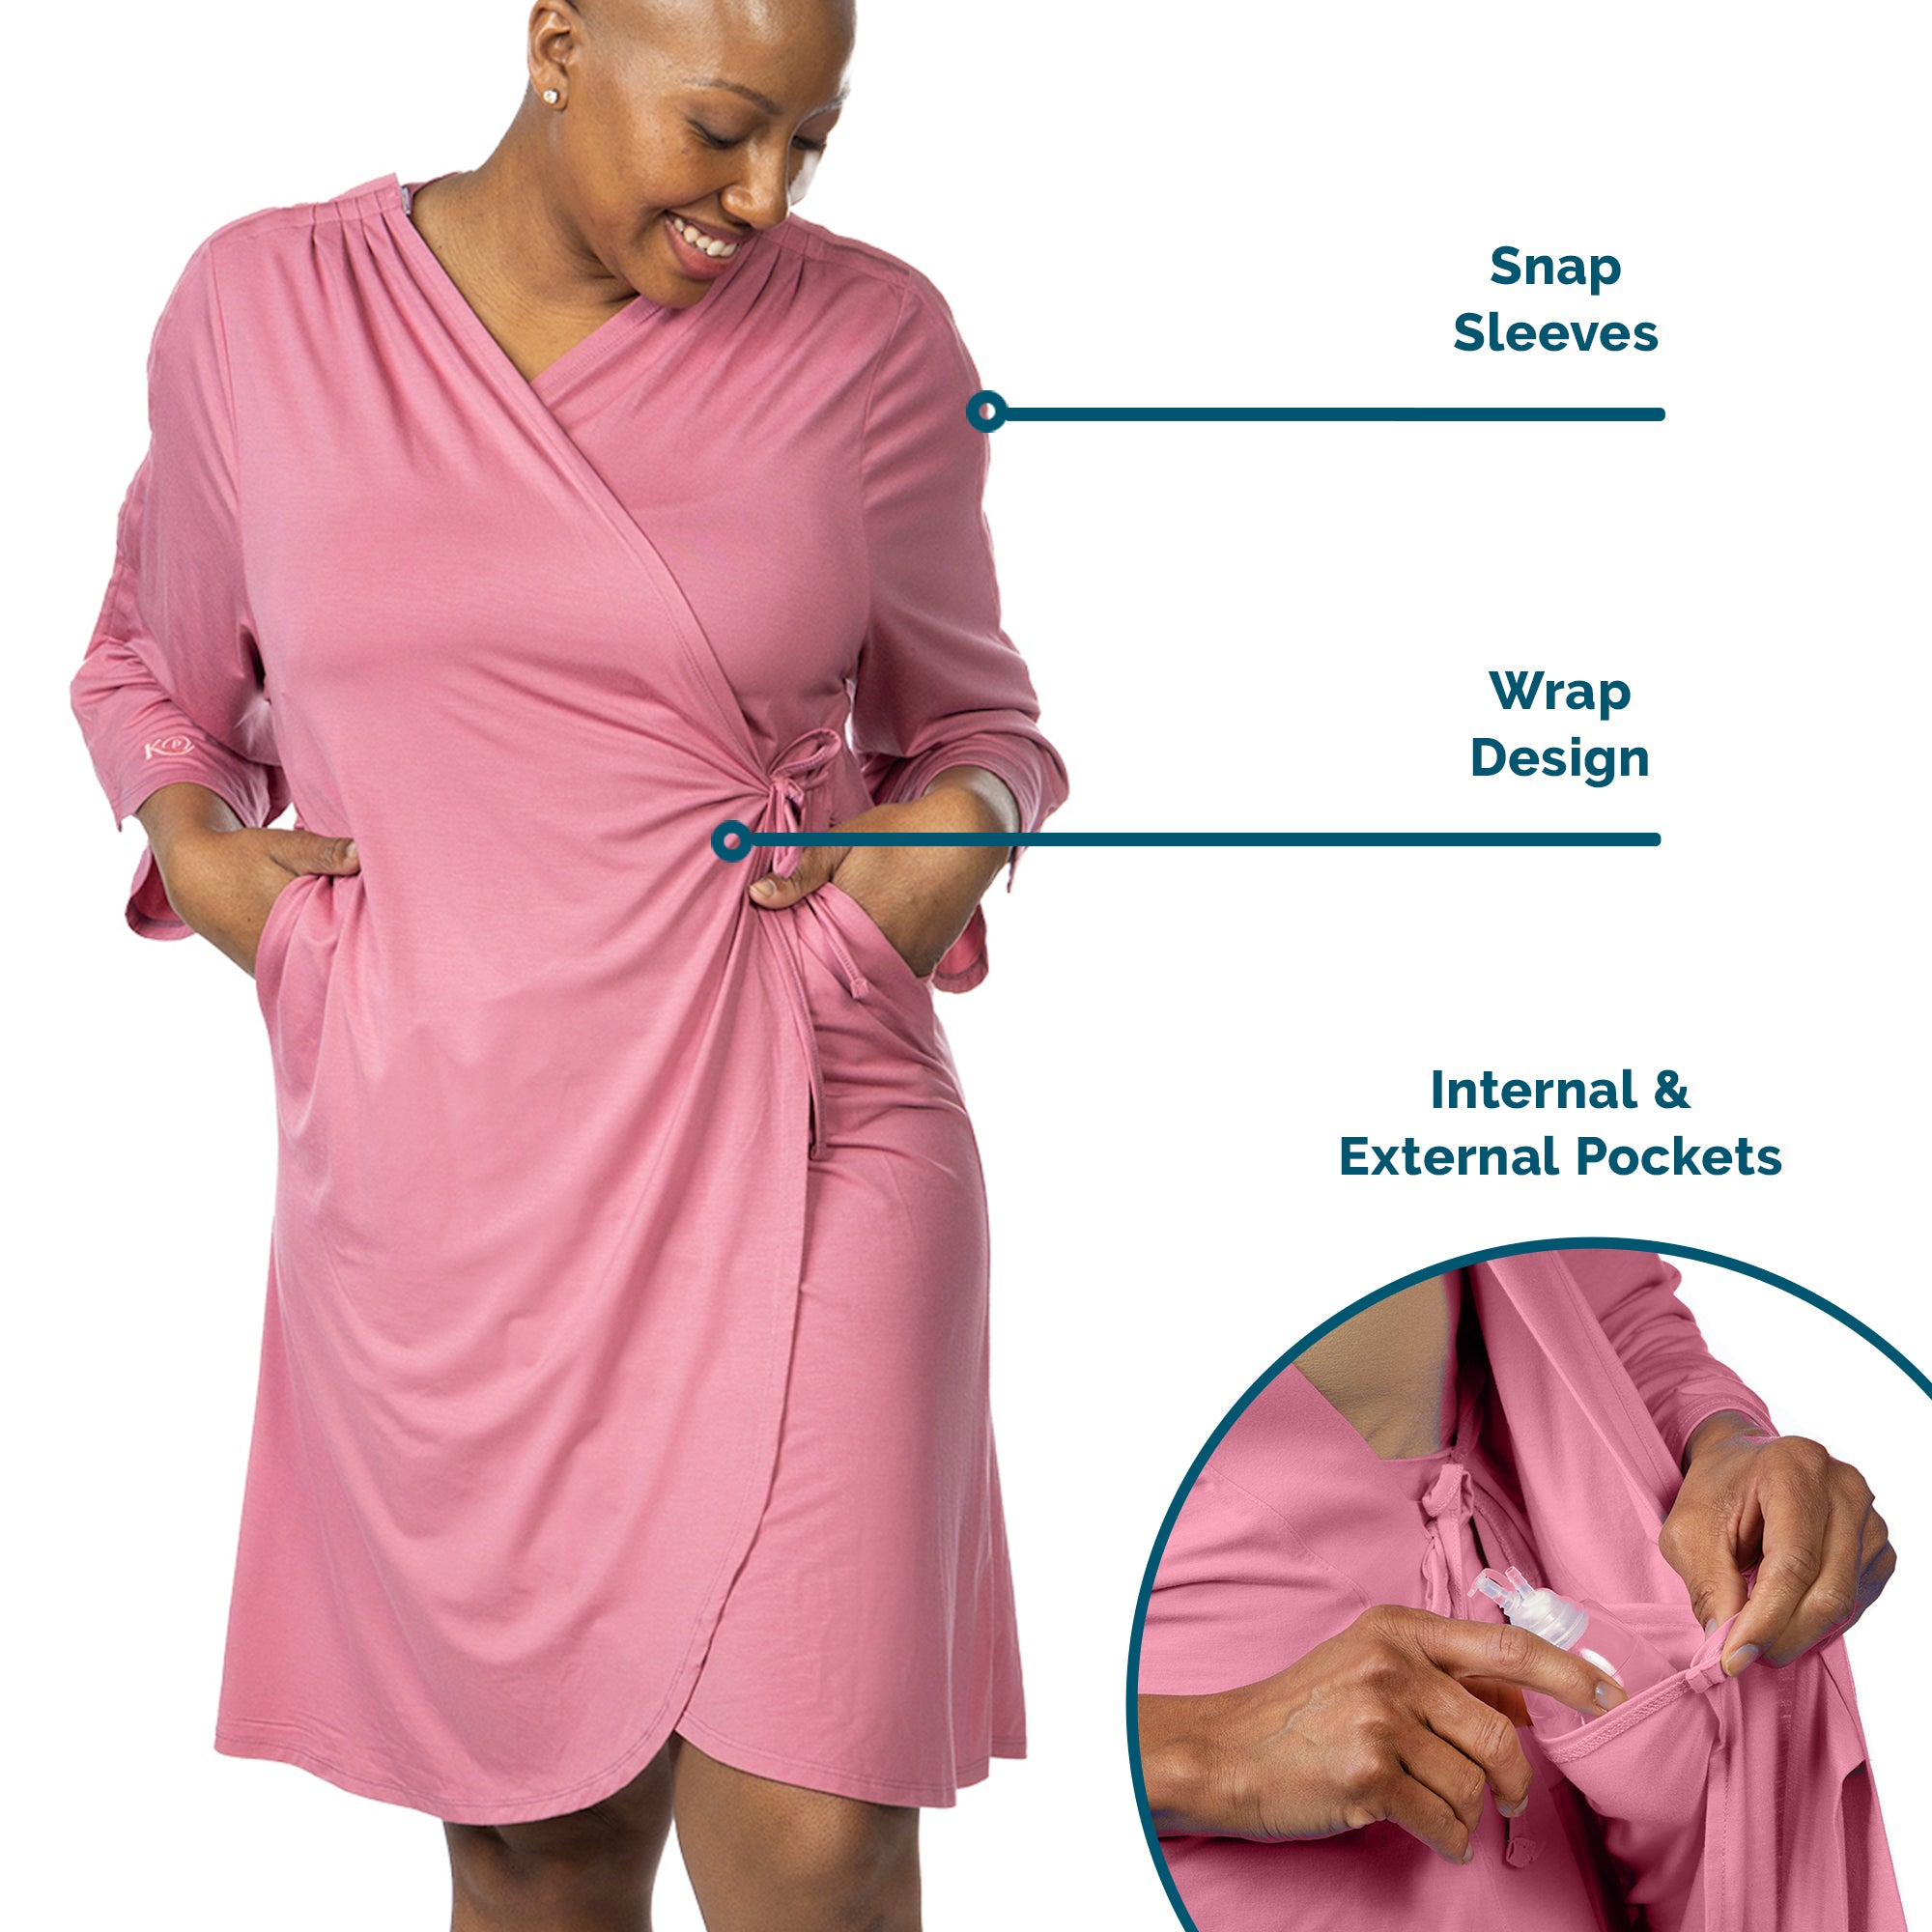 KickIt Hospital Gown with Snap Sleeves in Dusty Rose